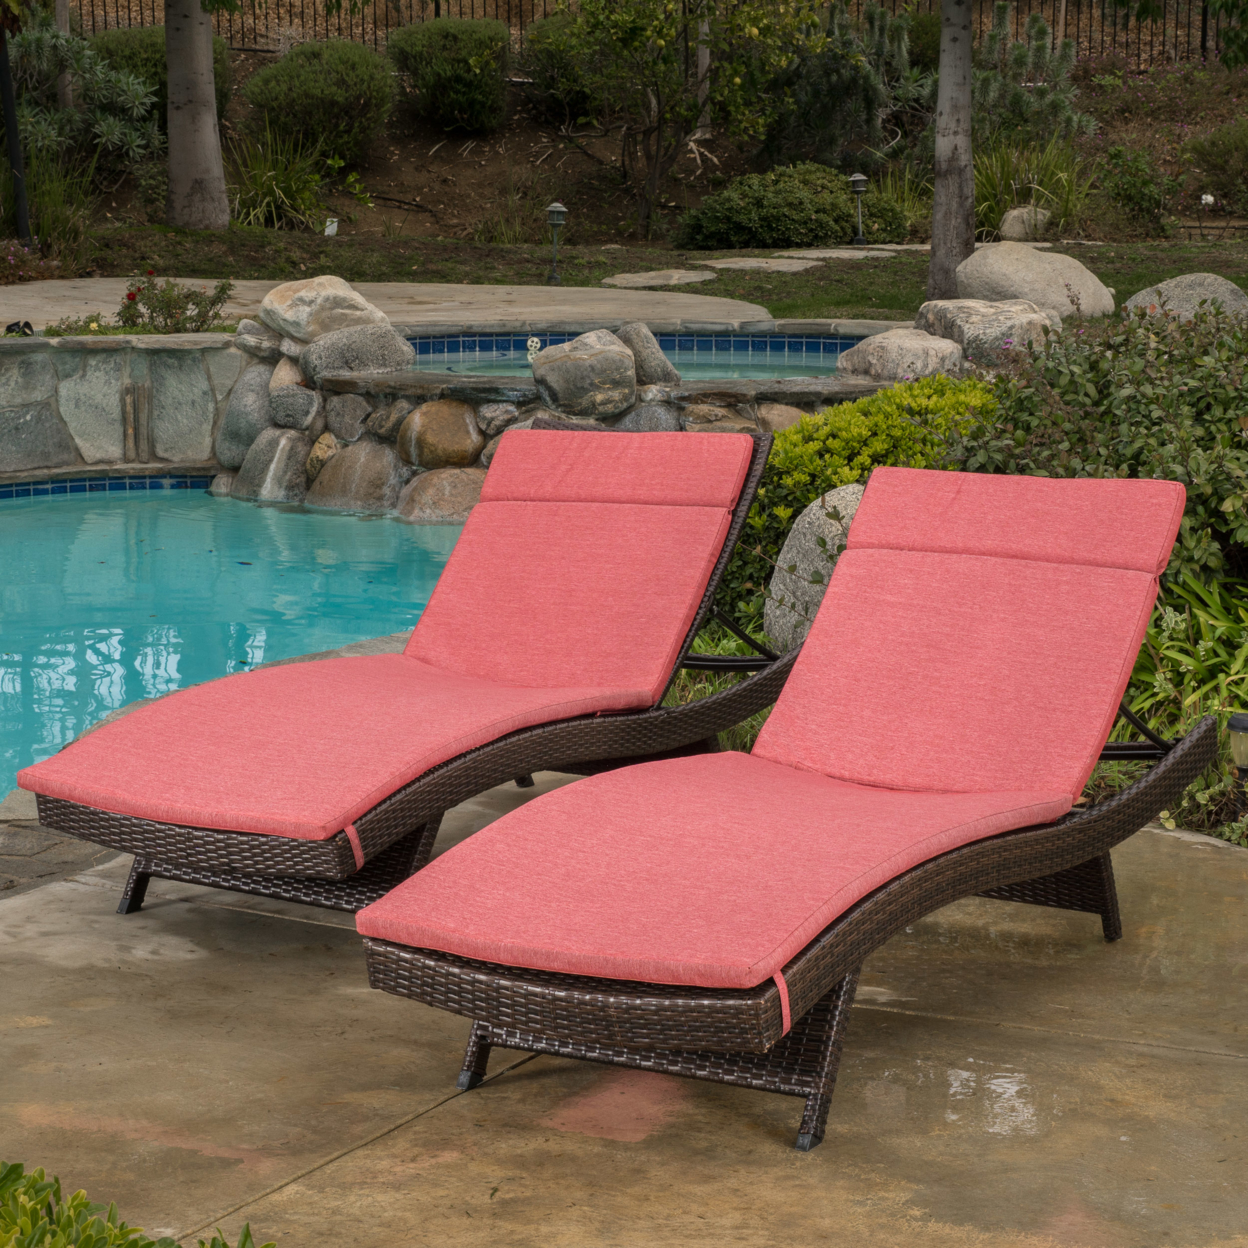 Lakeport Outdoor Adjustable Chaise Lounge Chairs With Cushions (set Of 2) - Red Cushion